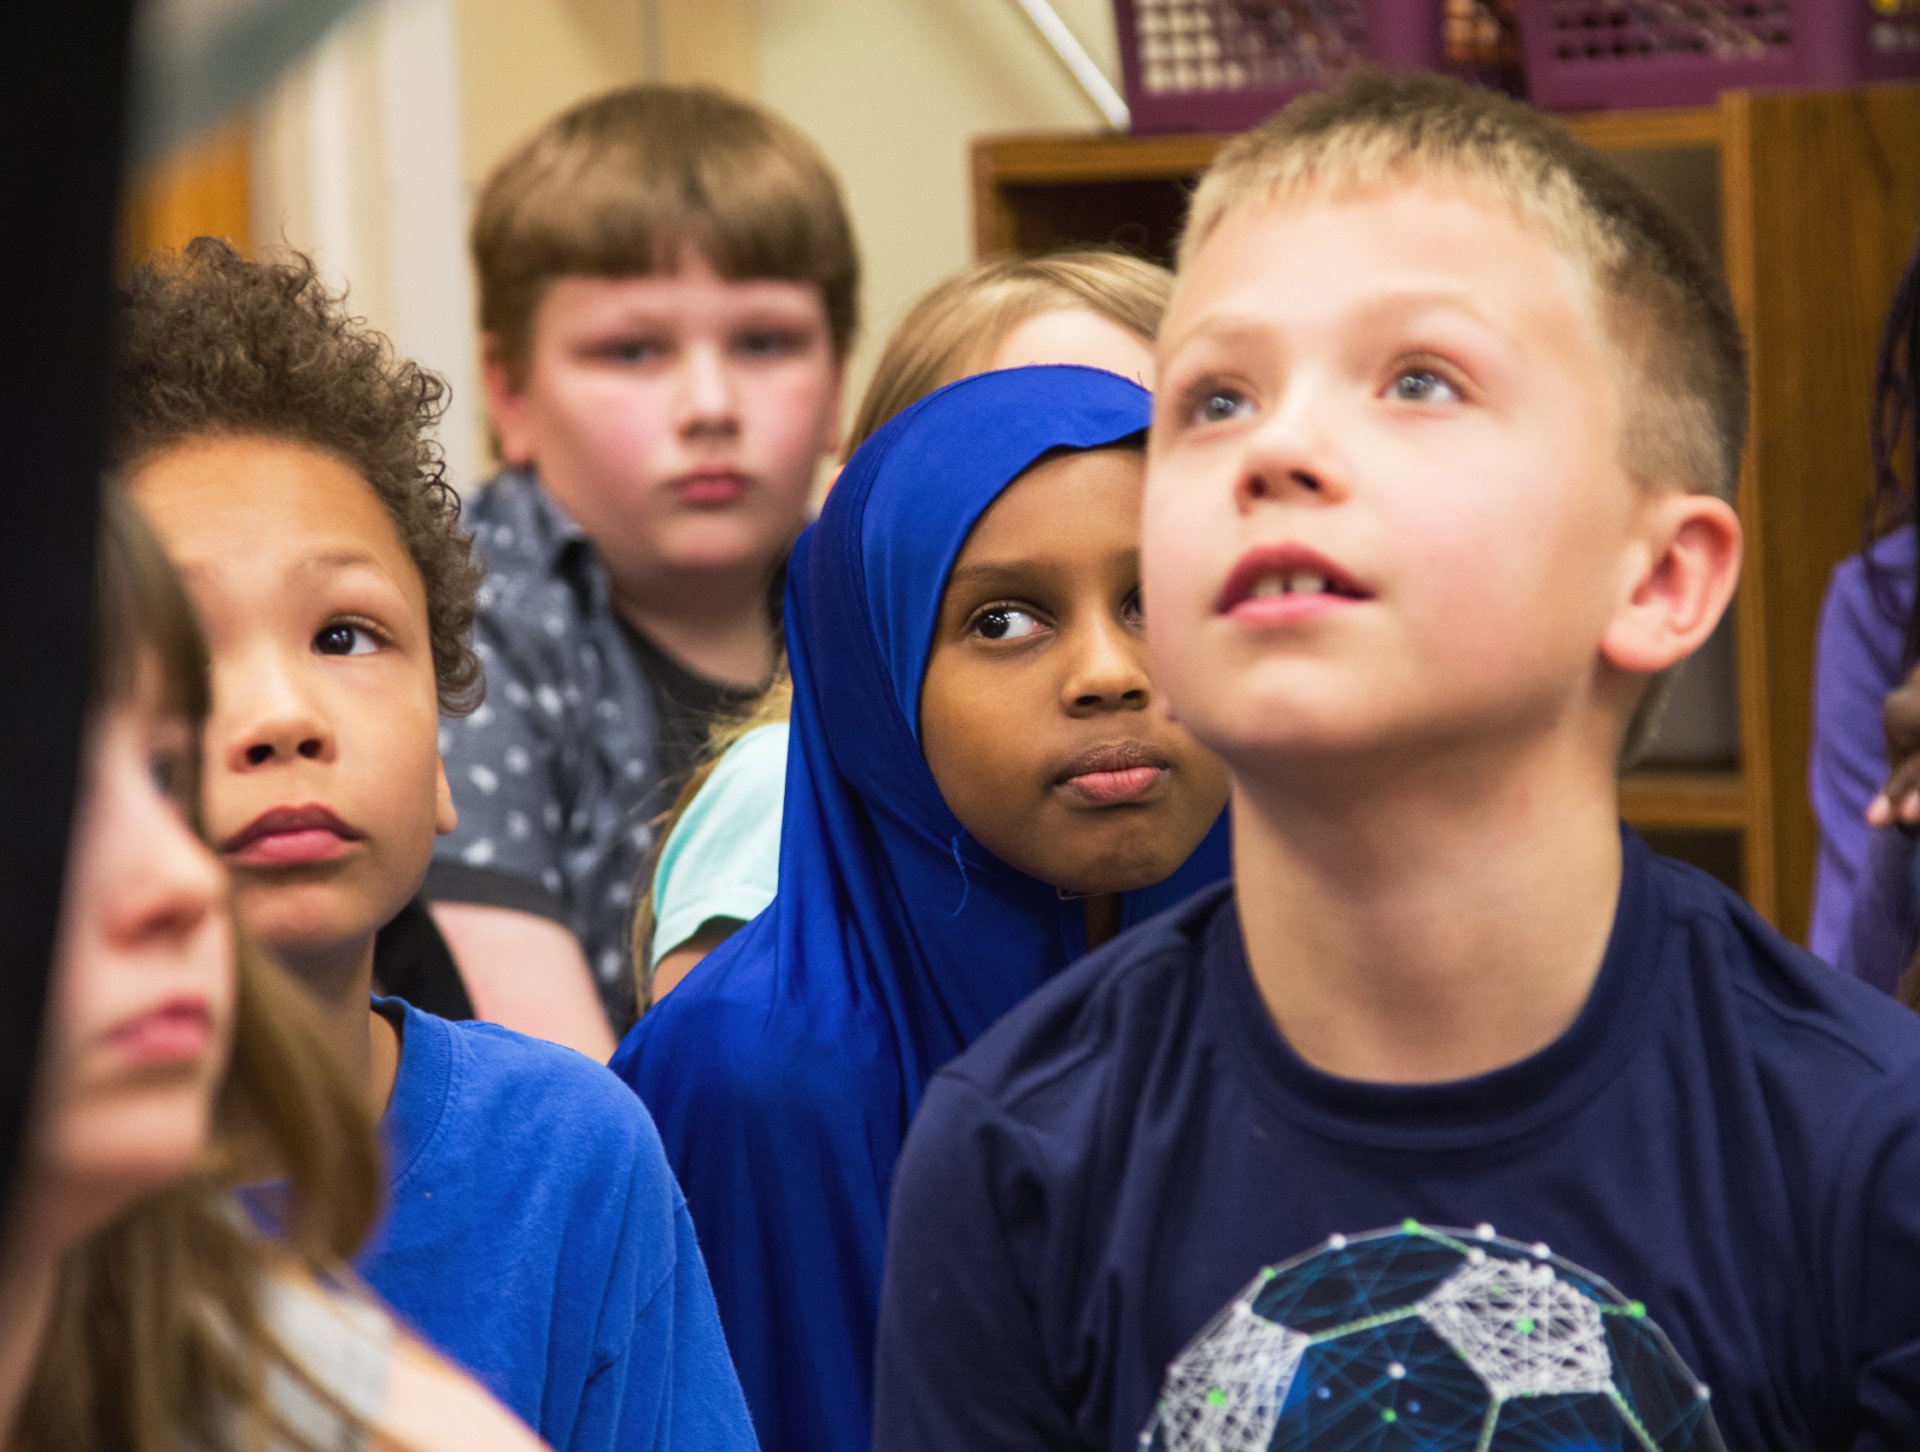 A group of diverse children attentively looking upwards with expressions of curiosity and interest.